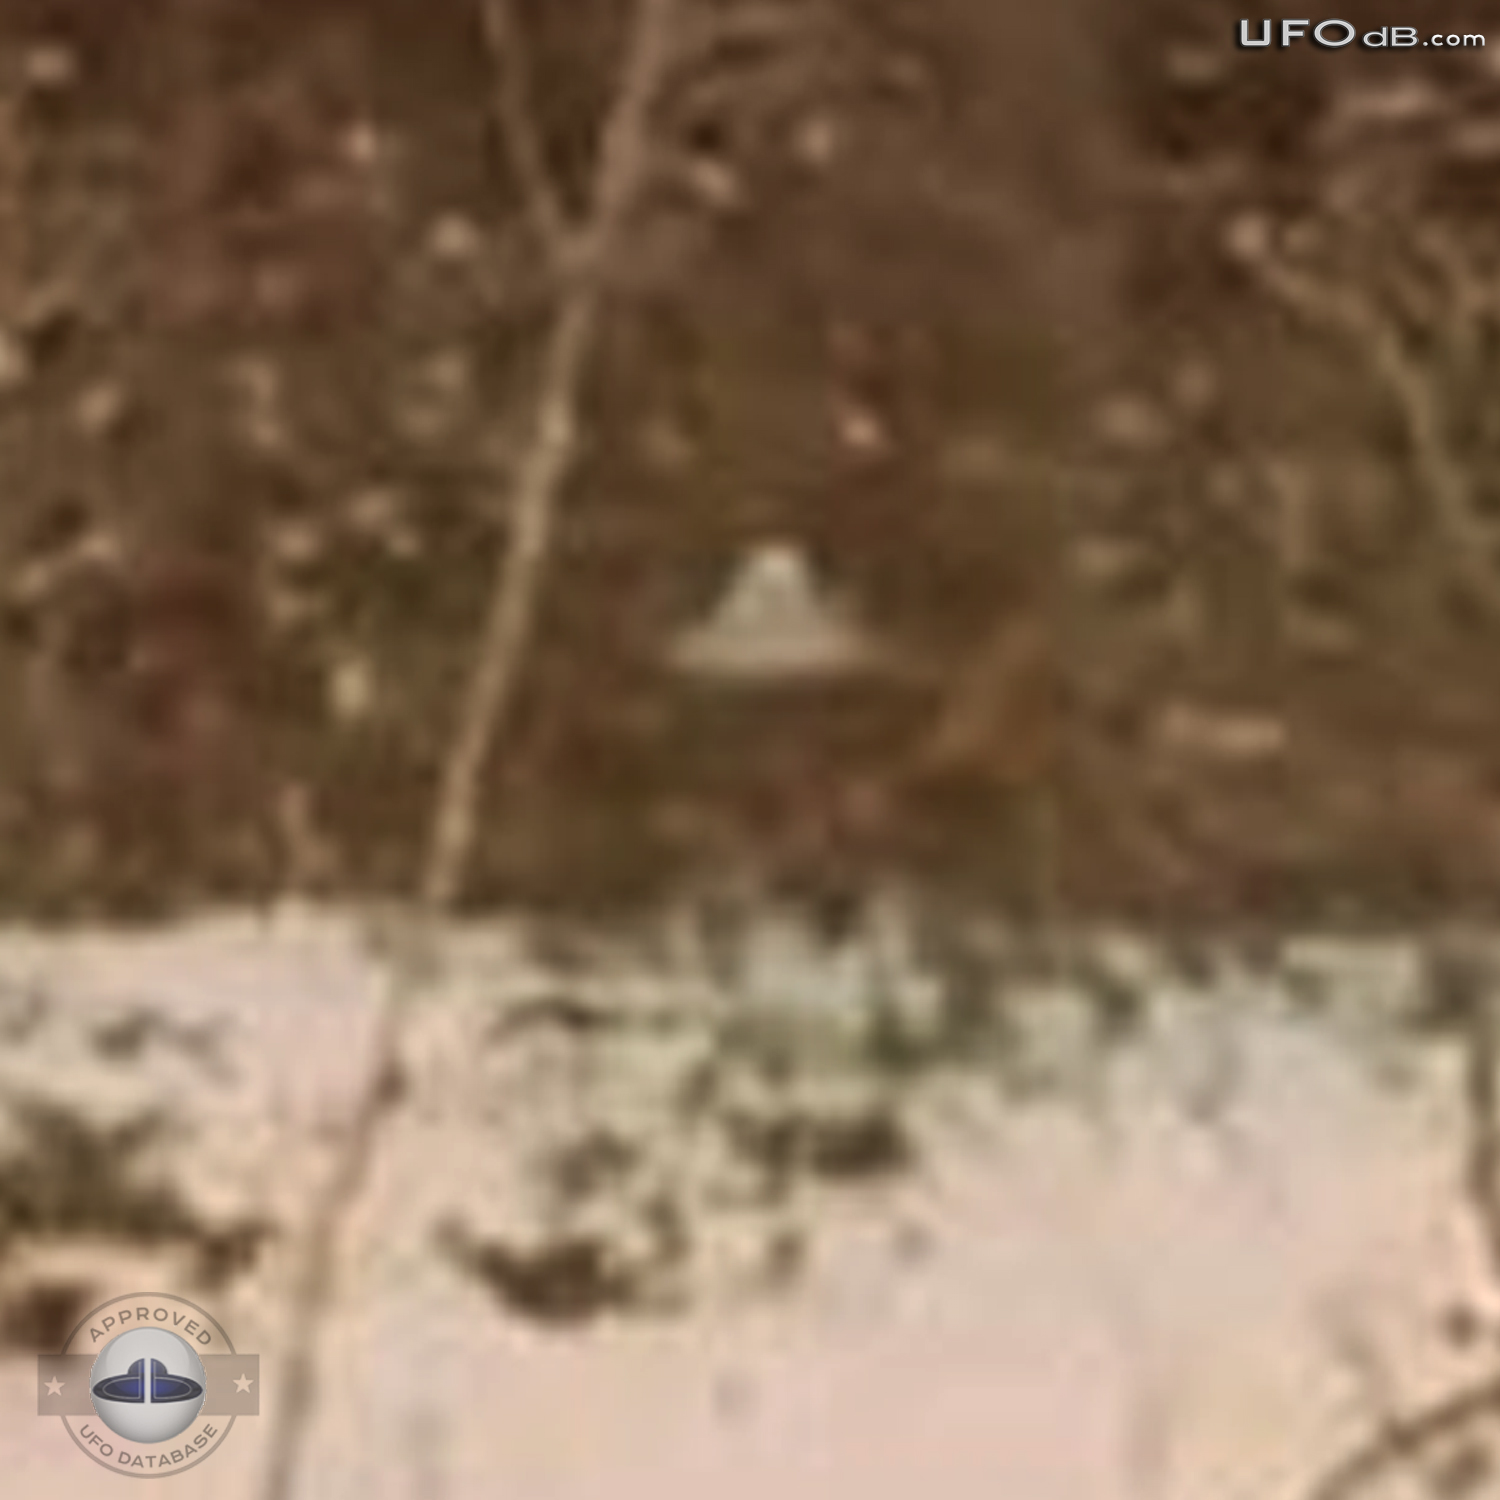 Suonenjoki UFO probe going around trees in the forest | March 16 1979 UFO Picture #336-4